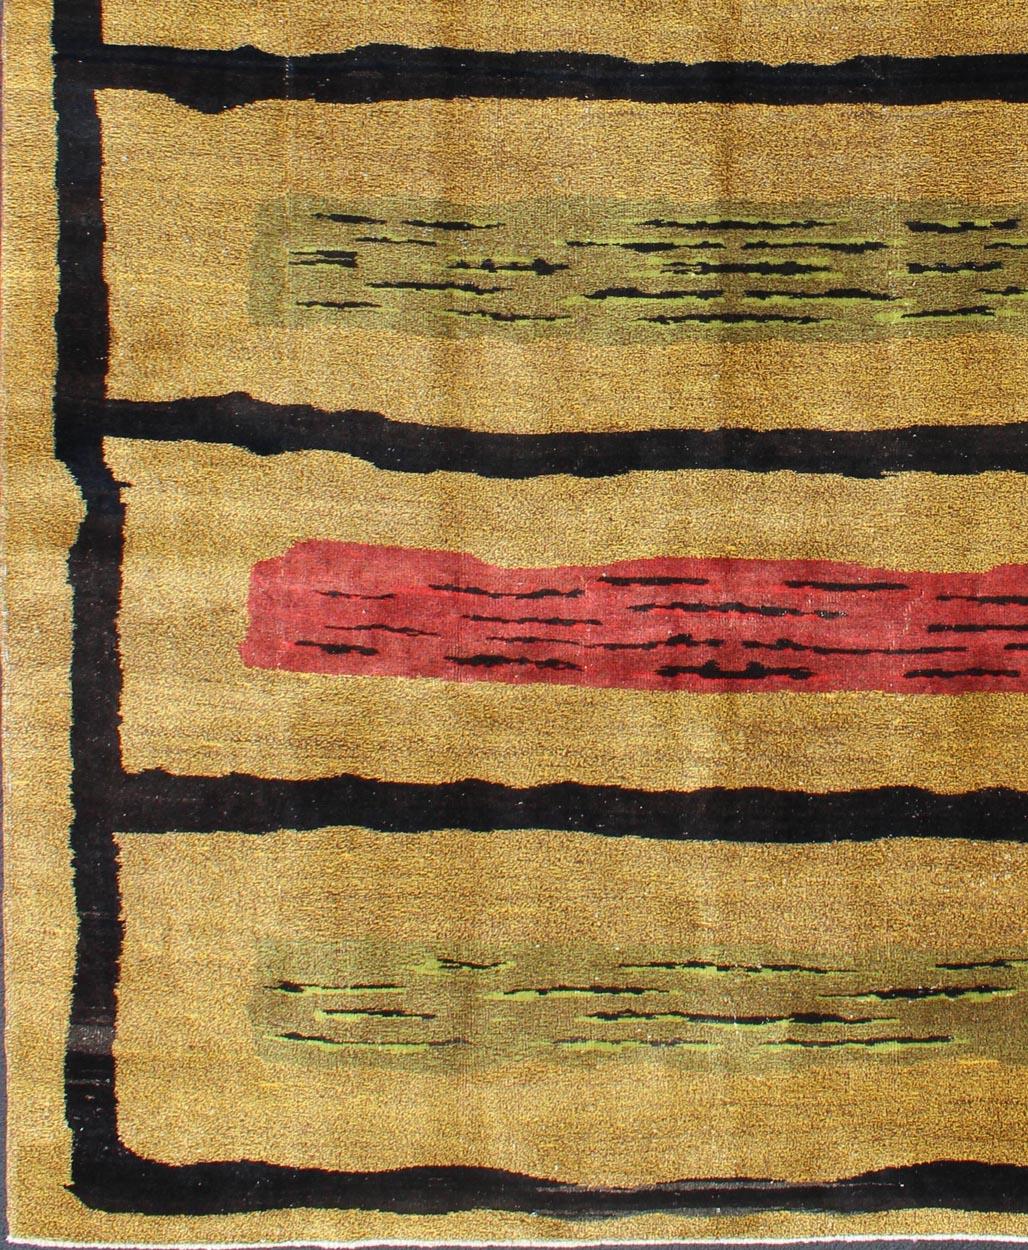 Attributed to the famous Turkish rug designer, Zeki Müren, this Mid-Century modern design rug displays a sandy-tan background. The rug features five black outlined boxes with shades of green and red alternate with hints of black. Simple yet modern.